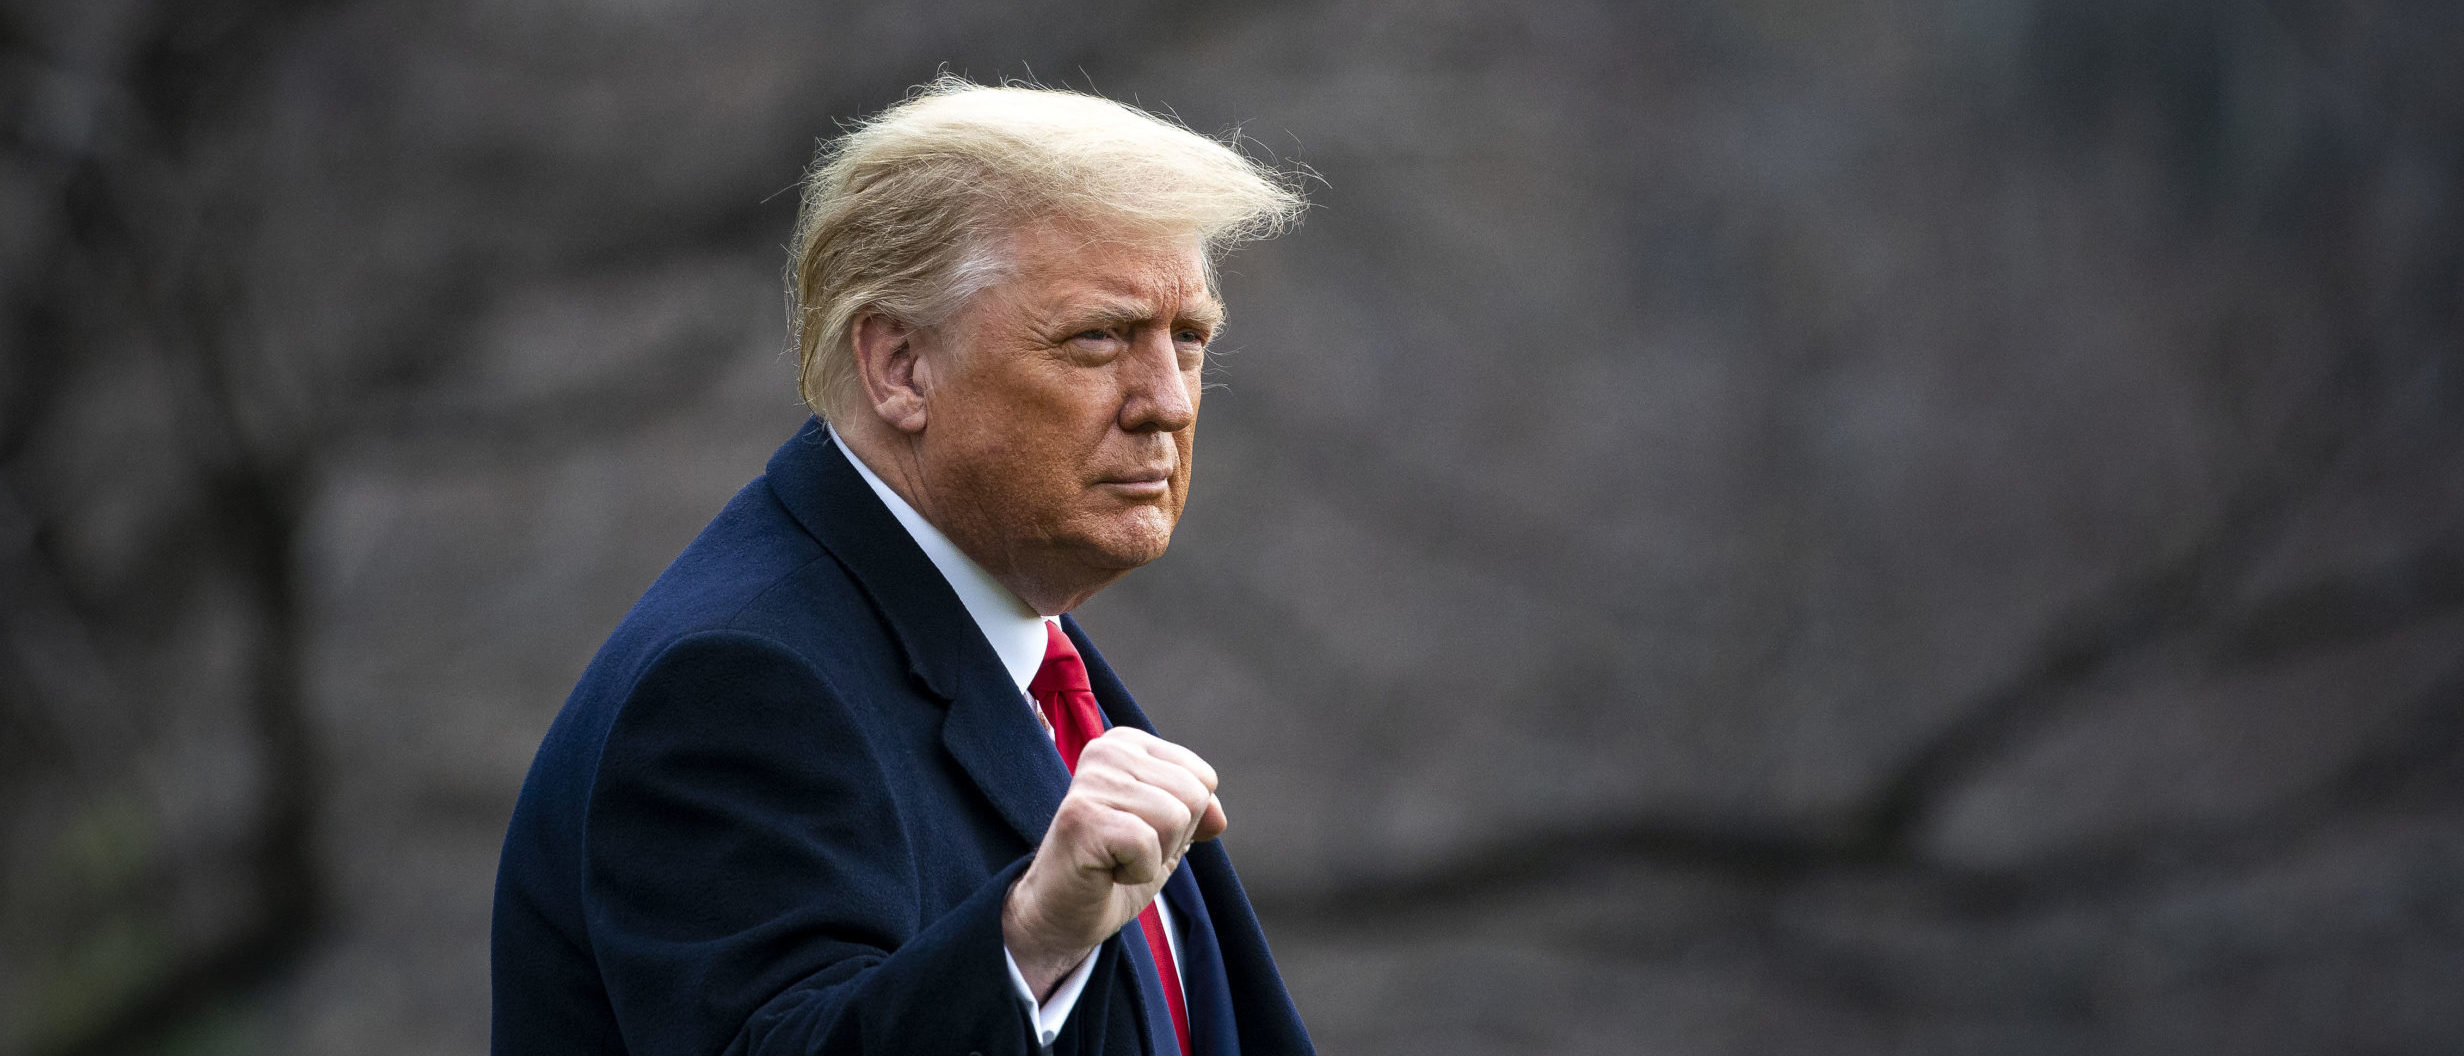 WASHINGTON, DC - DECEMBER 12: U.S. President Donald Trump pumps his fist as he departs on the South Lawn of the White House, on December 12, 2020 in Washington, DC. (Al Drago/Getty Images)